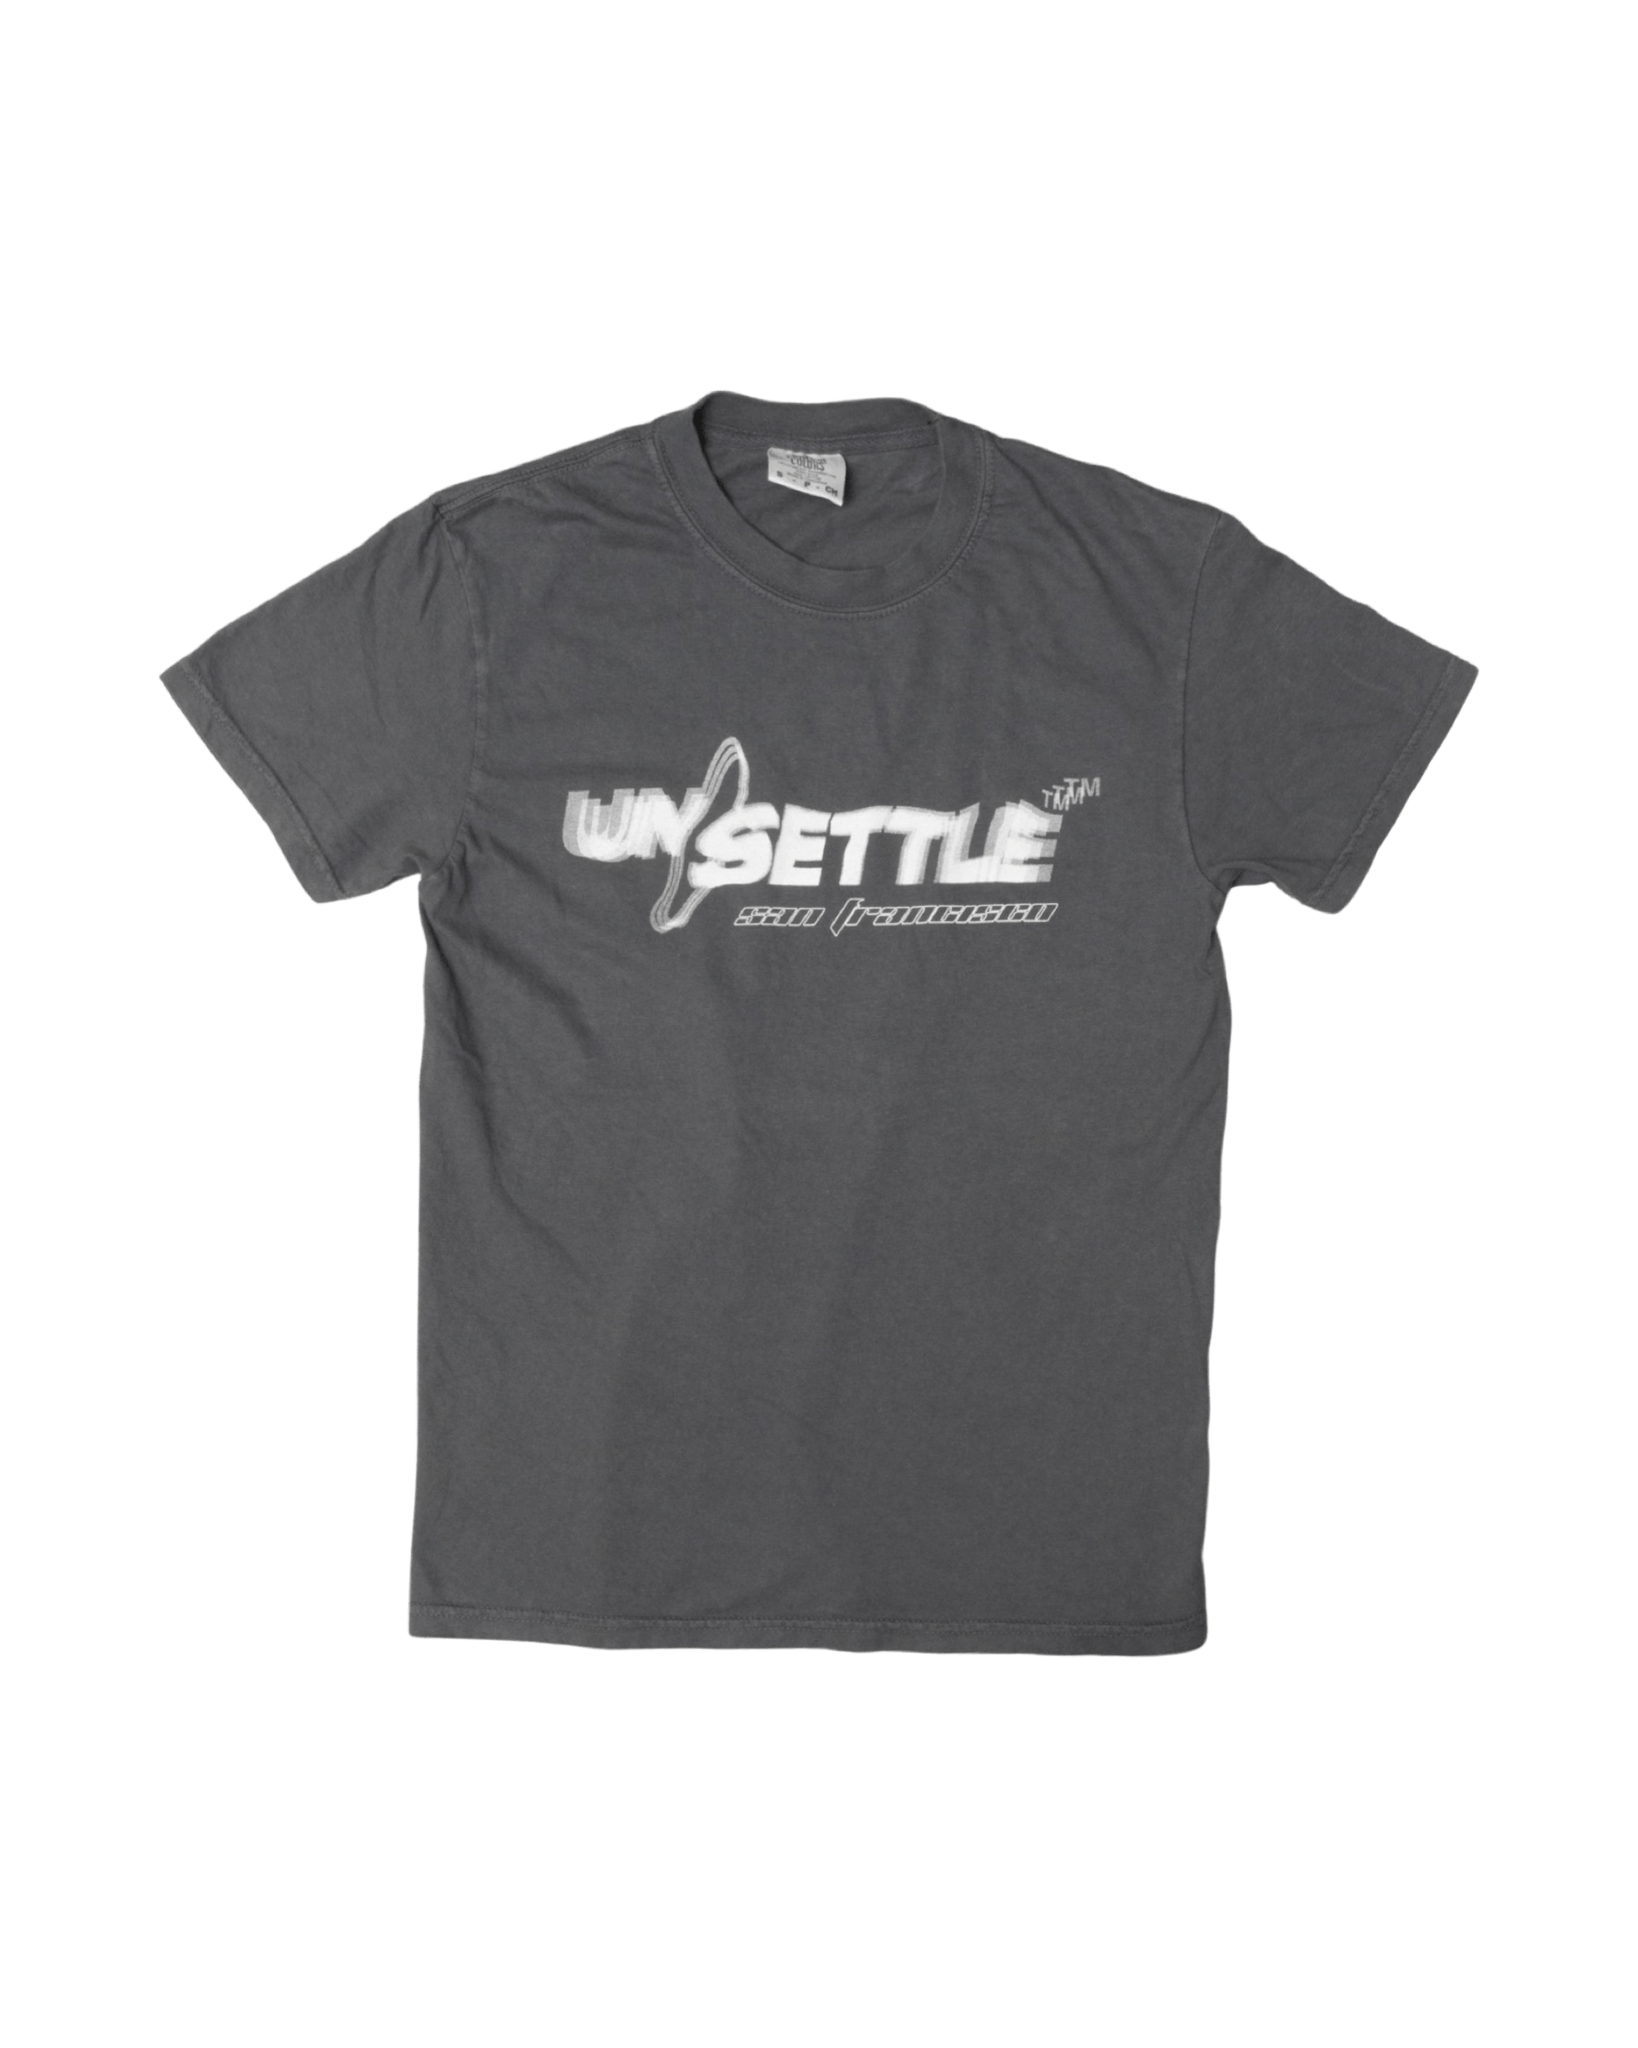 Frequency Graphic Tee – Unsettle